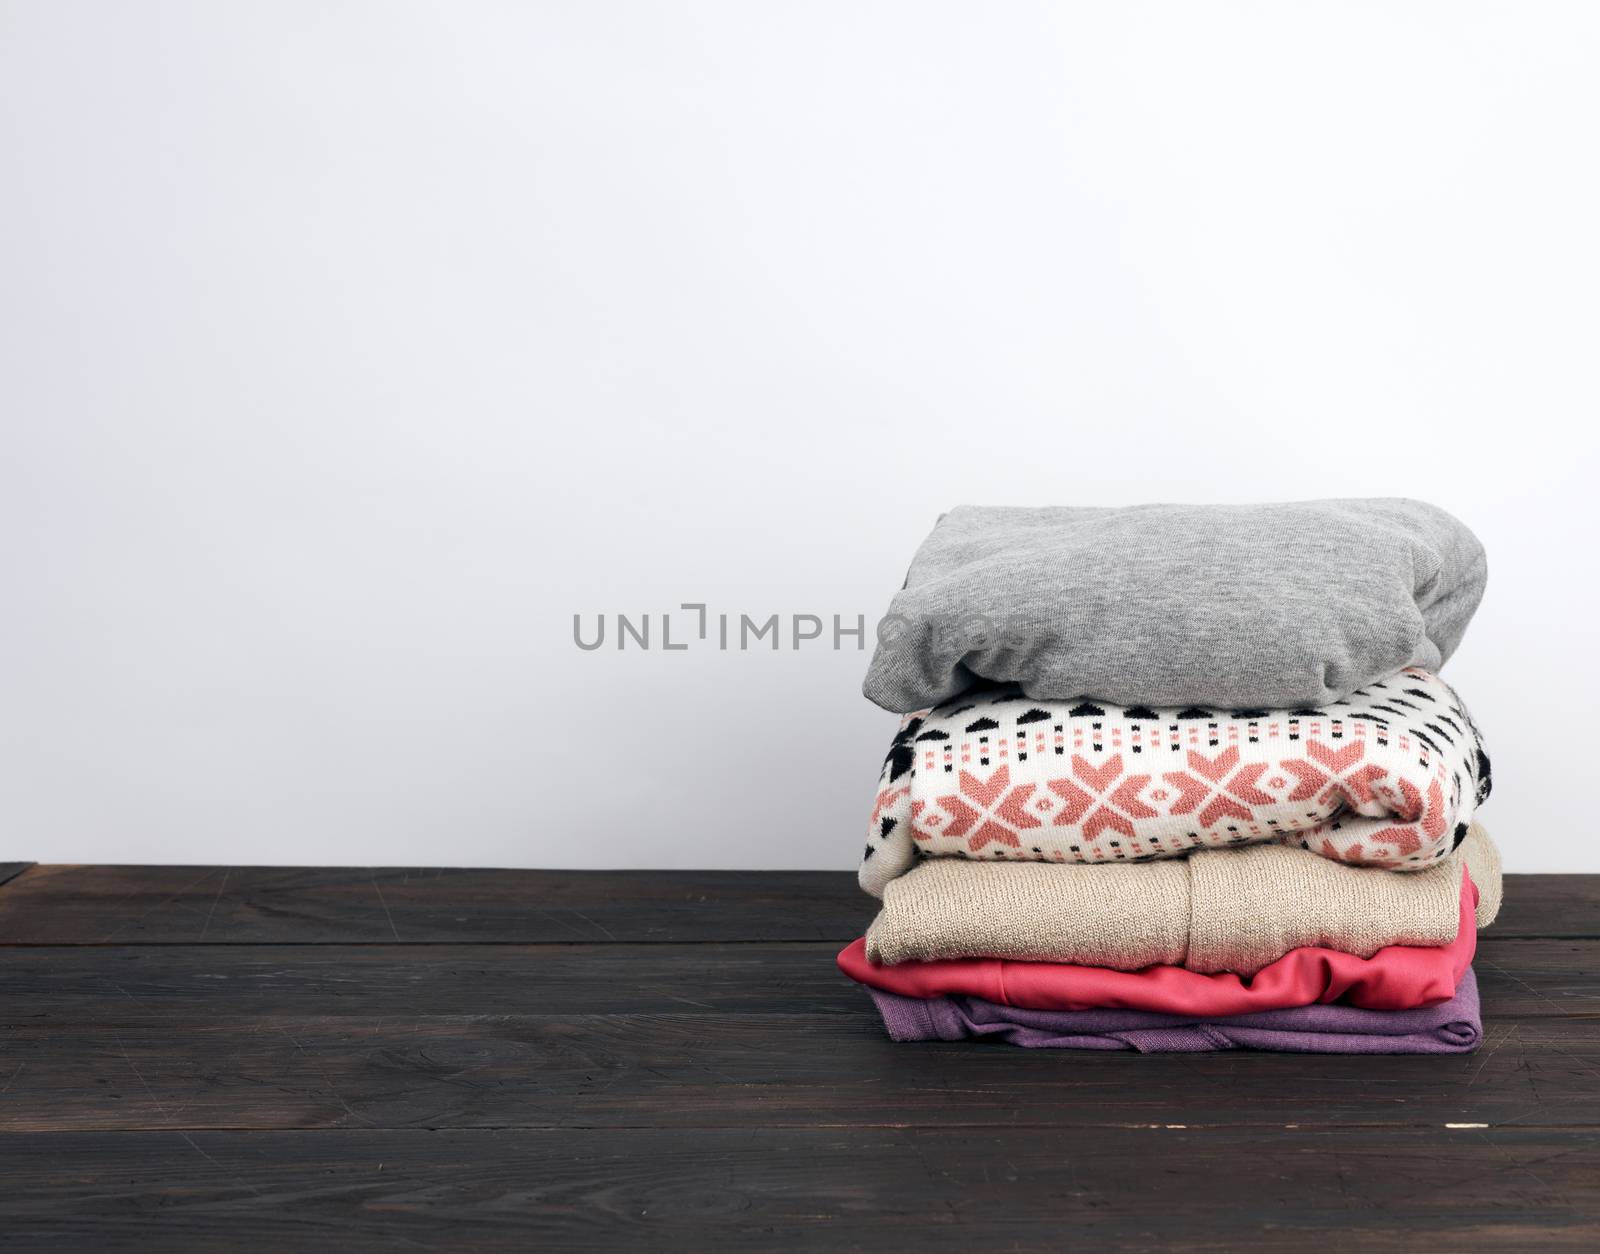 stack of various folded clothes on a wooden table, white backgro by ndanko